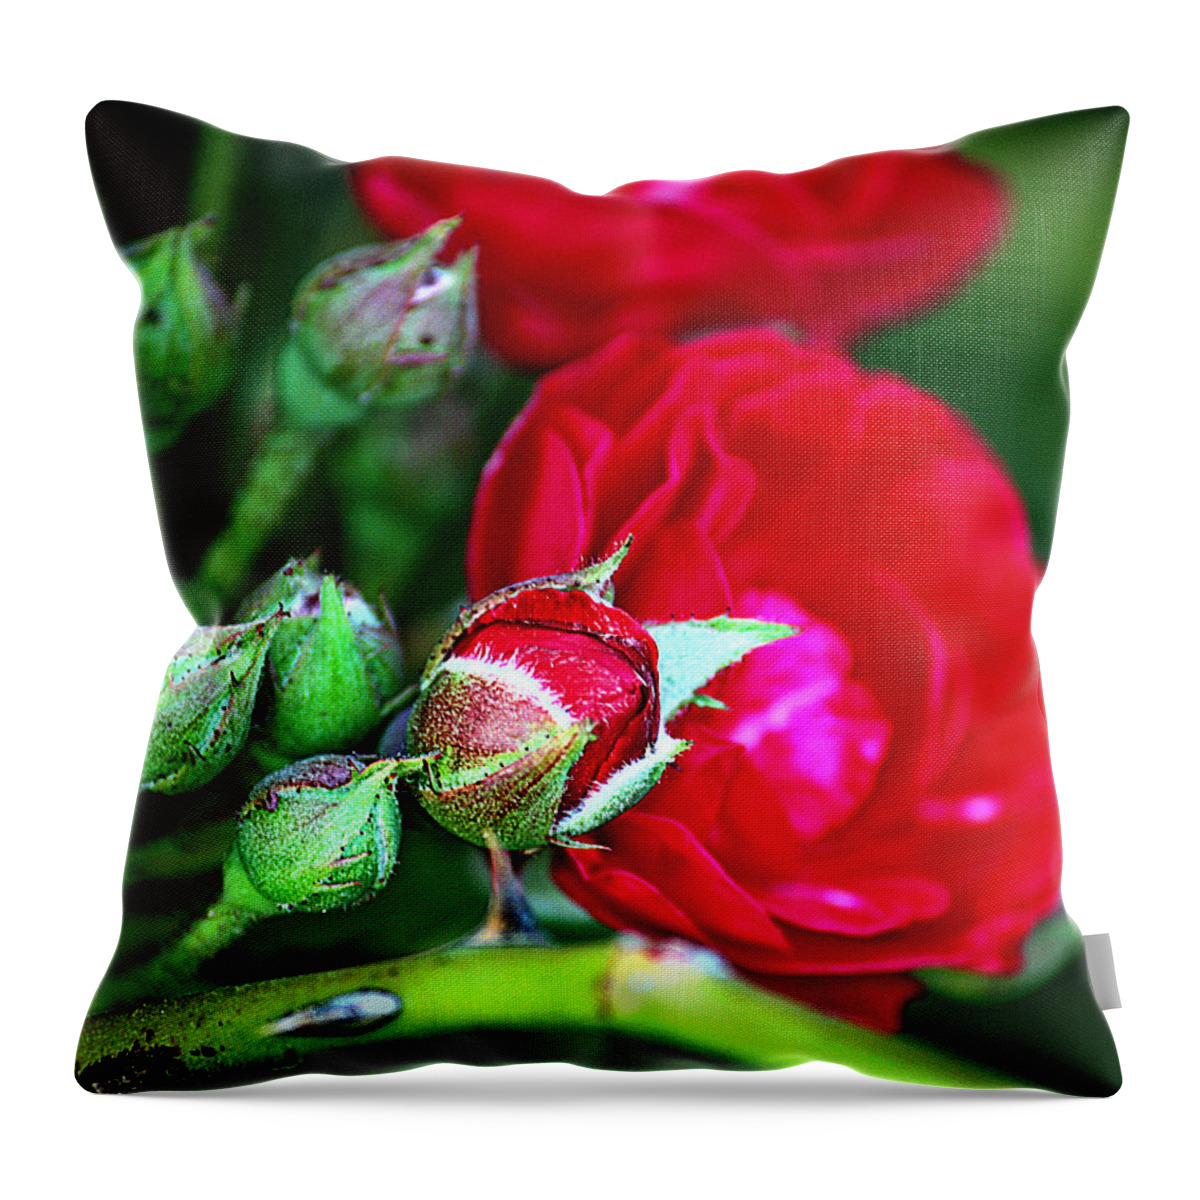 Rose Throw Pillow featuring the photograph Tiny Red Rosebuds by KayeCee Spain